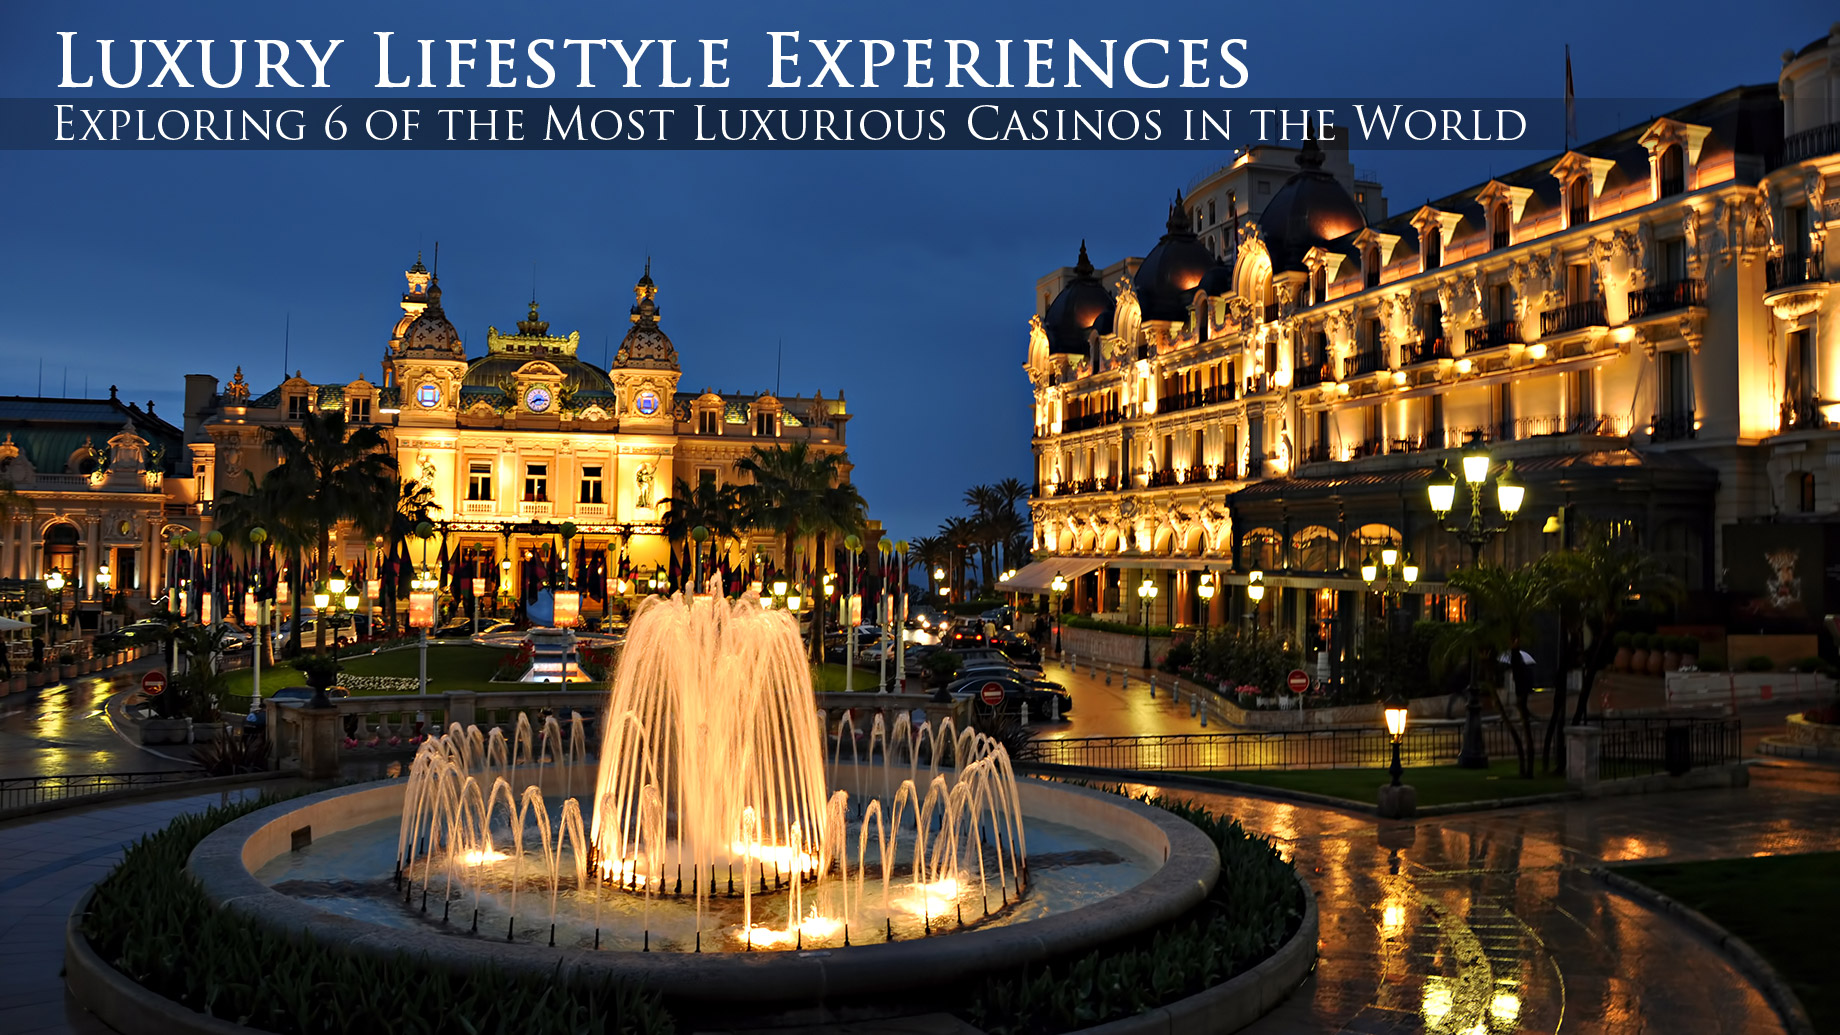 Luxury Lifestyle Experiences - Exploring 6 of the Most Luxurious Casinos in the World